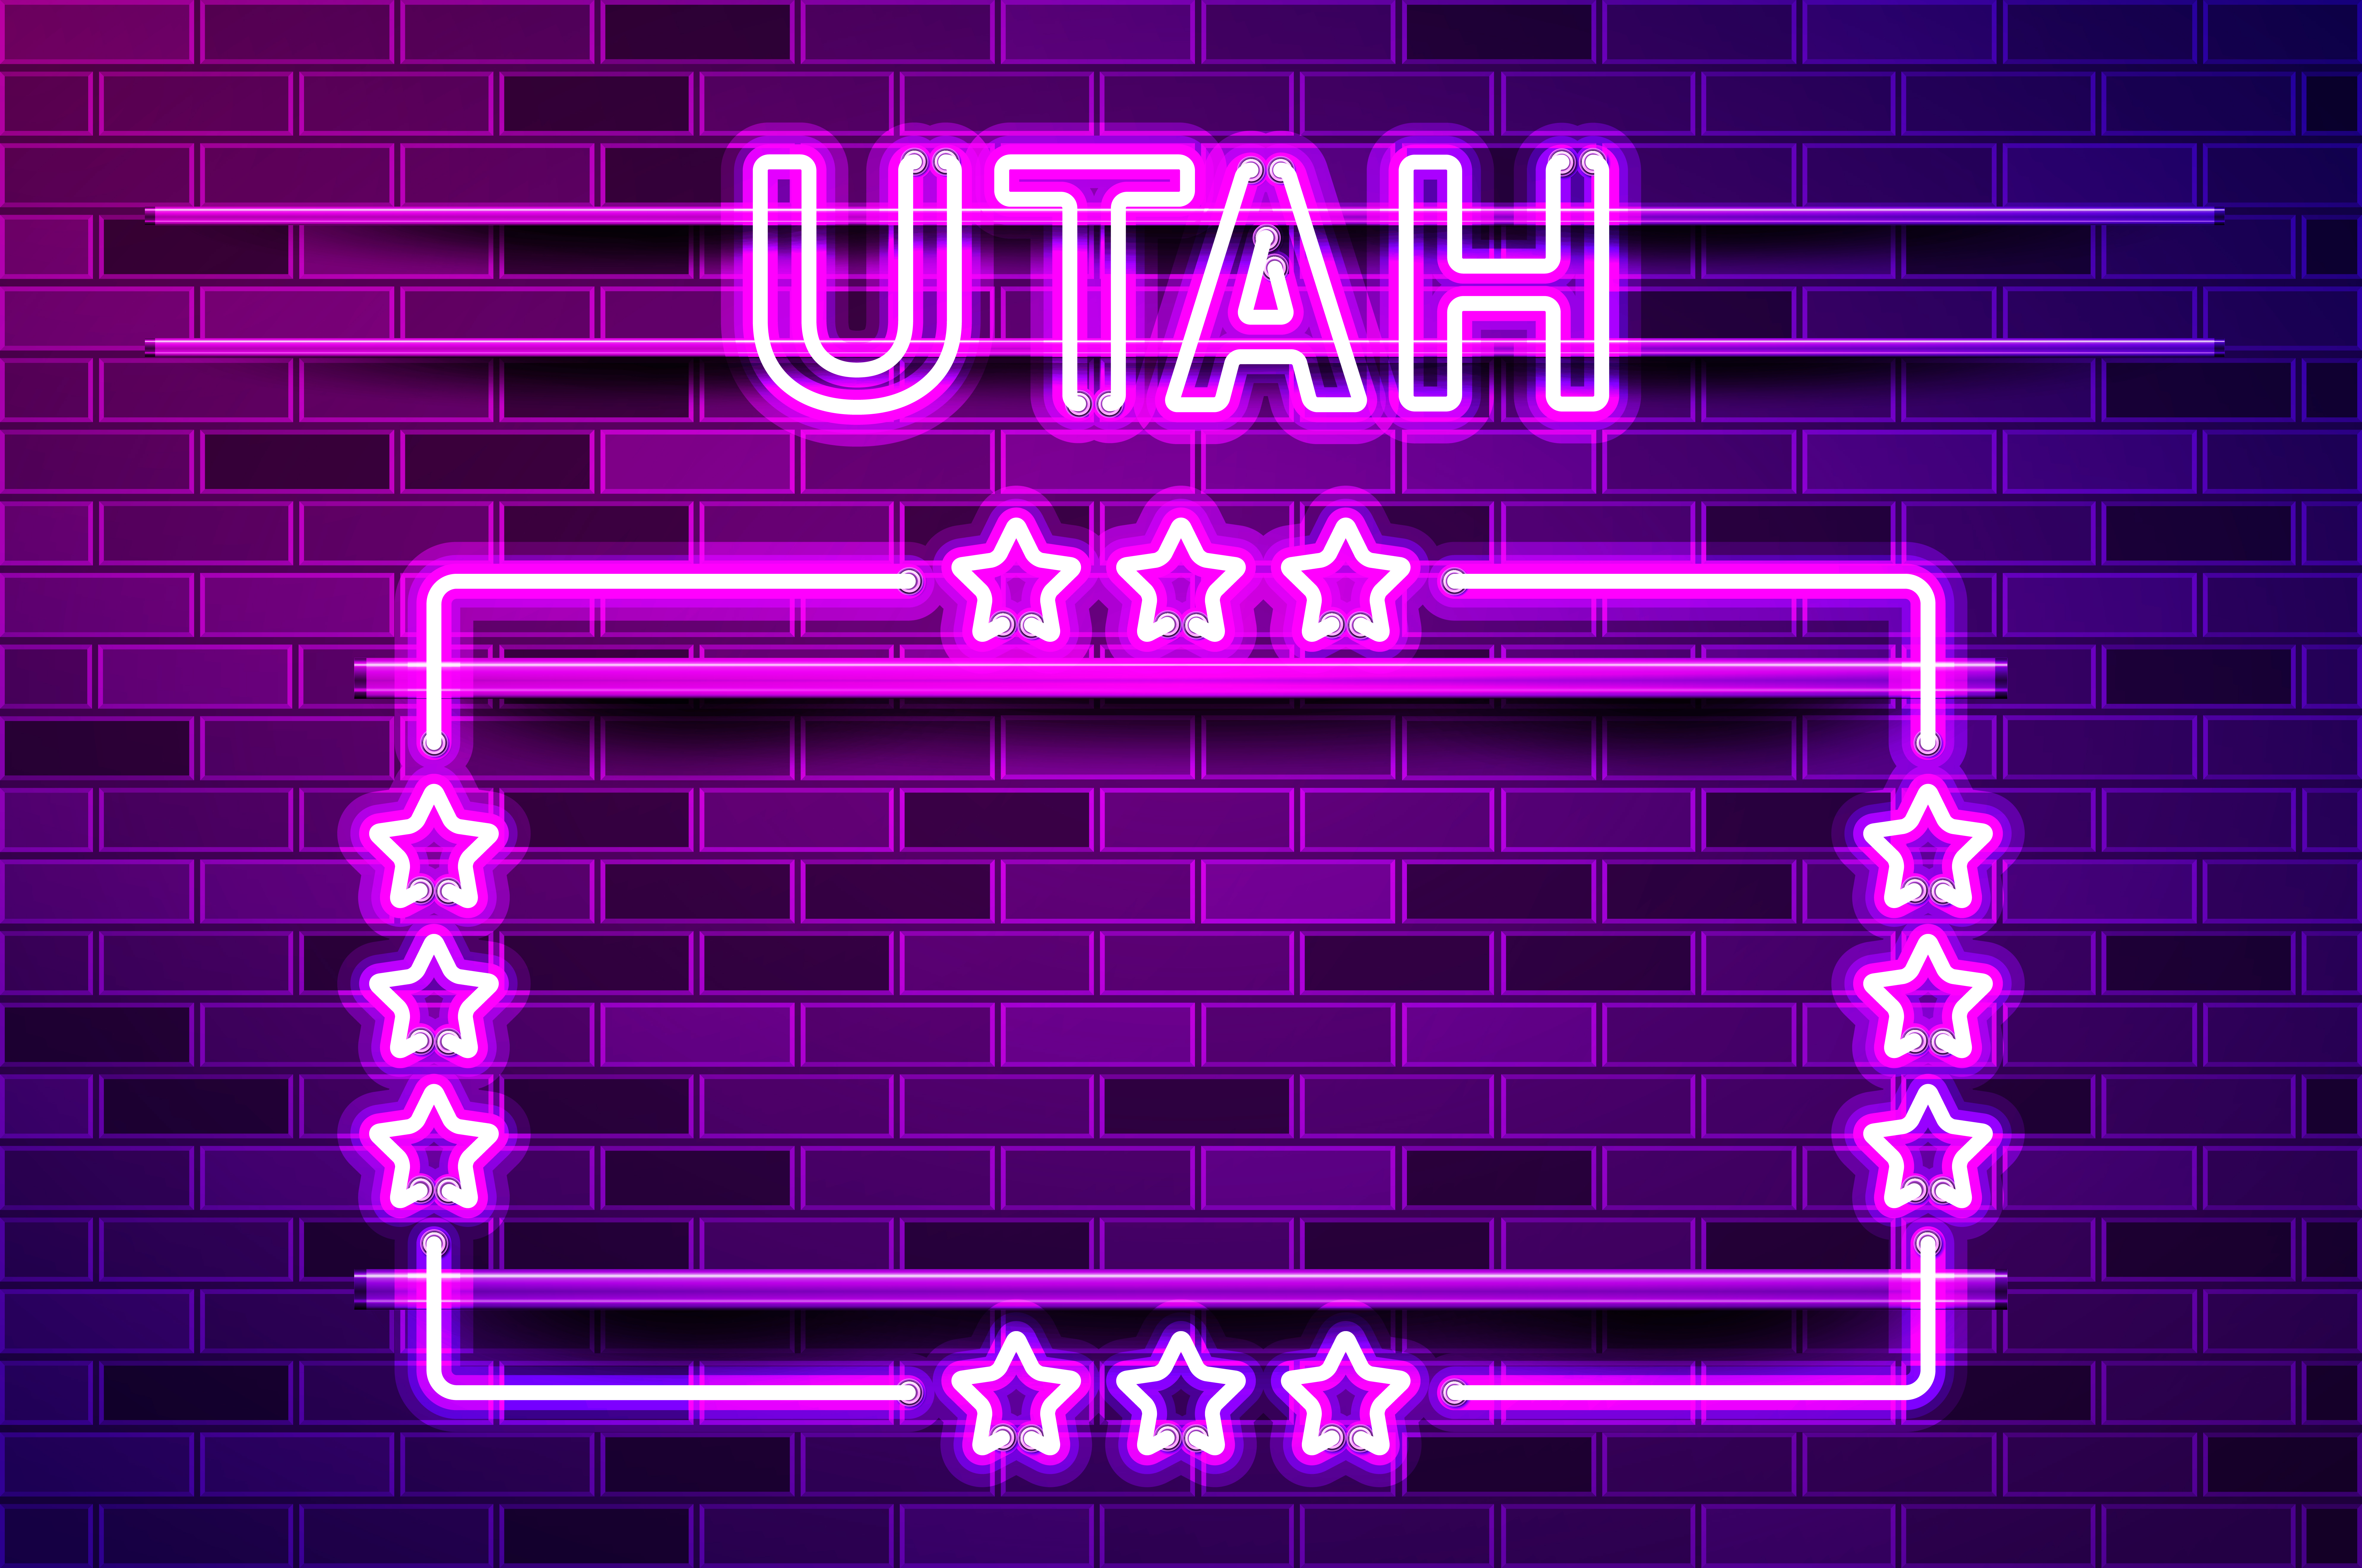 Utah US State glowing purple neon lettering and a rectangular frame with stars. Realistic vector illustration. Purple brick wall, violet glow, metal holders.. Utah US State glowing purple neon lettering and a rectangular frame with stars